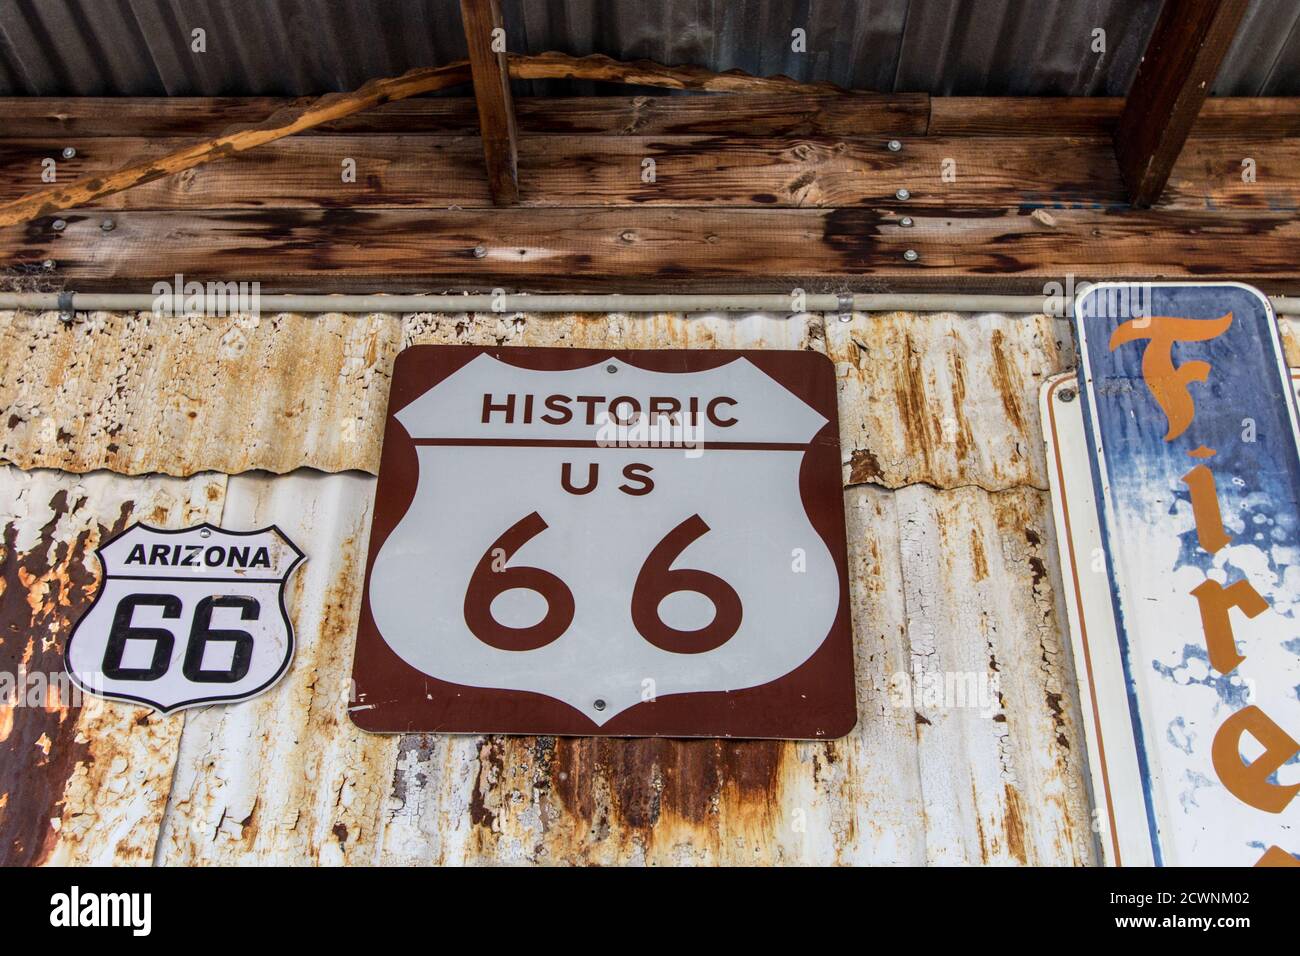 Hackberry, Arizona, USA - February 17, 2020: Rusty historic Arizona Route 66 sign at the Hackberry General Store in the American Southwest. Stock Photo